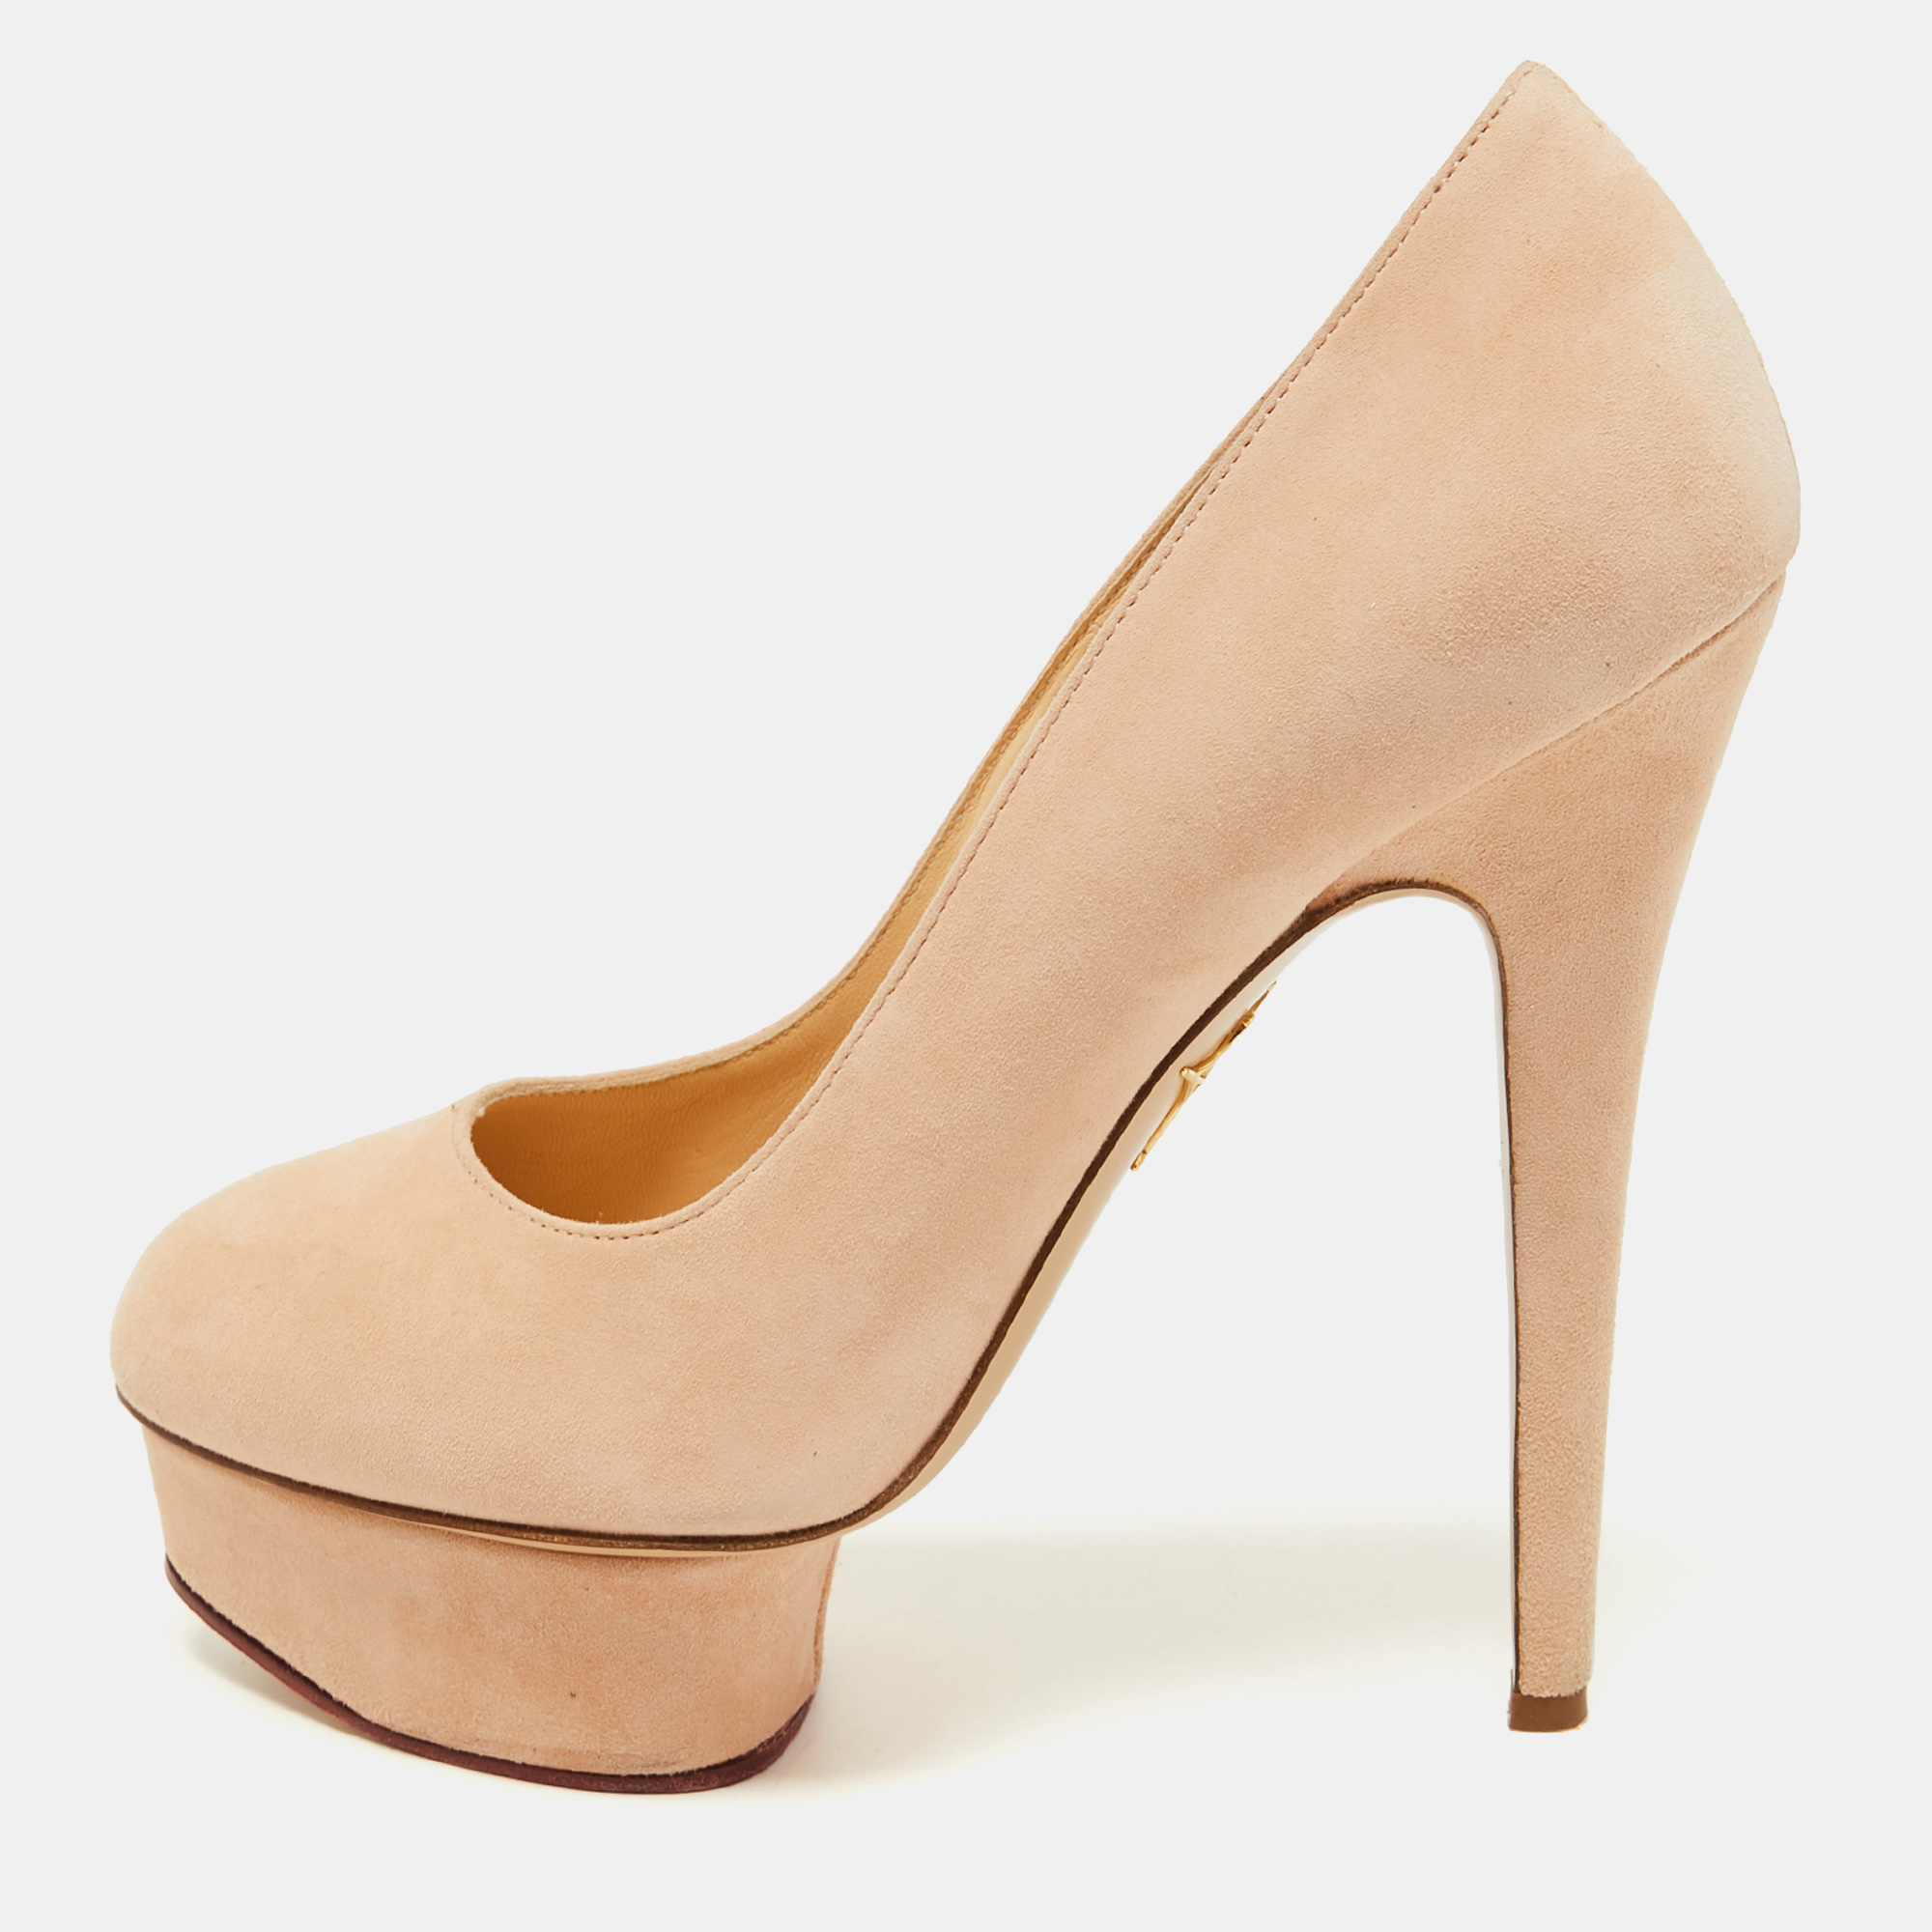 Pre-owned Charlotte Olympia Beige Suede Platform Pumps Size 37.5